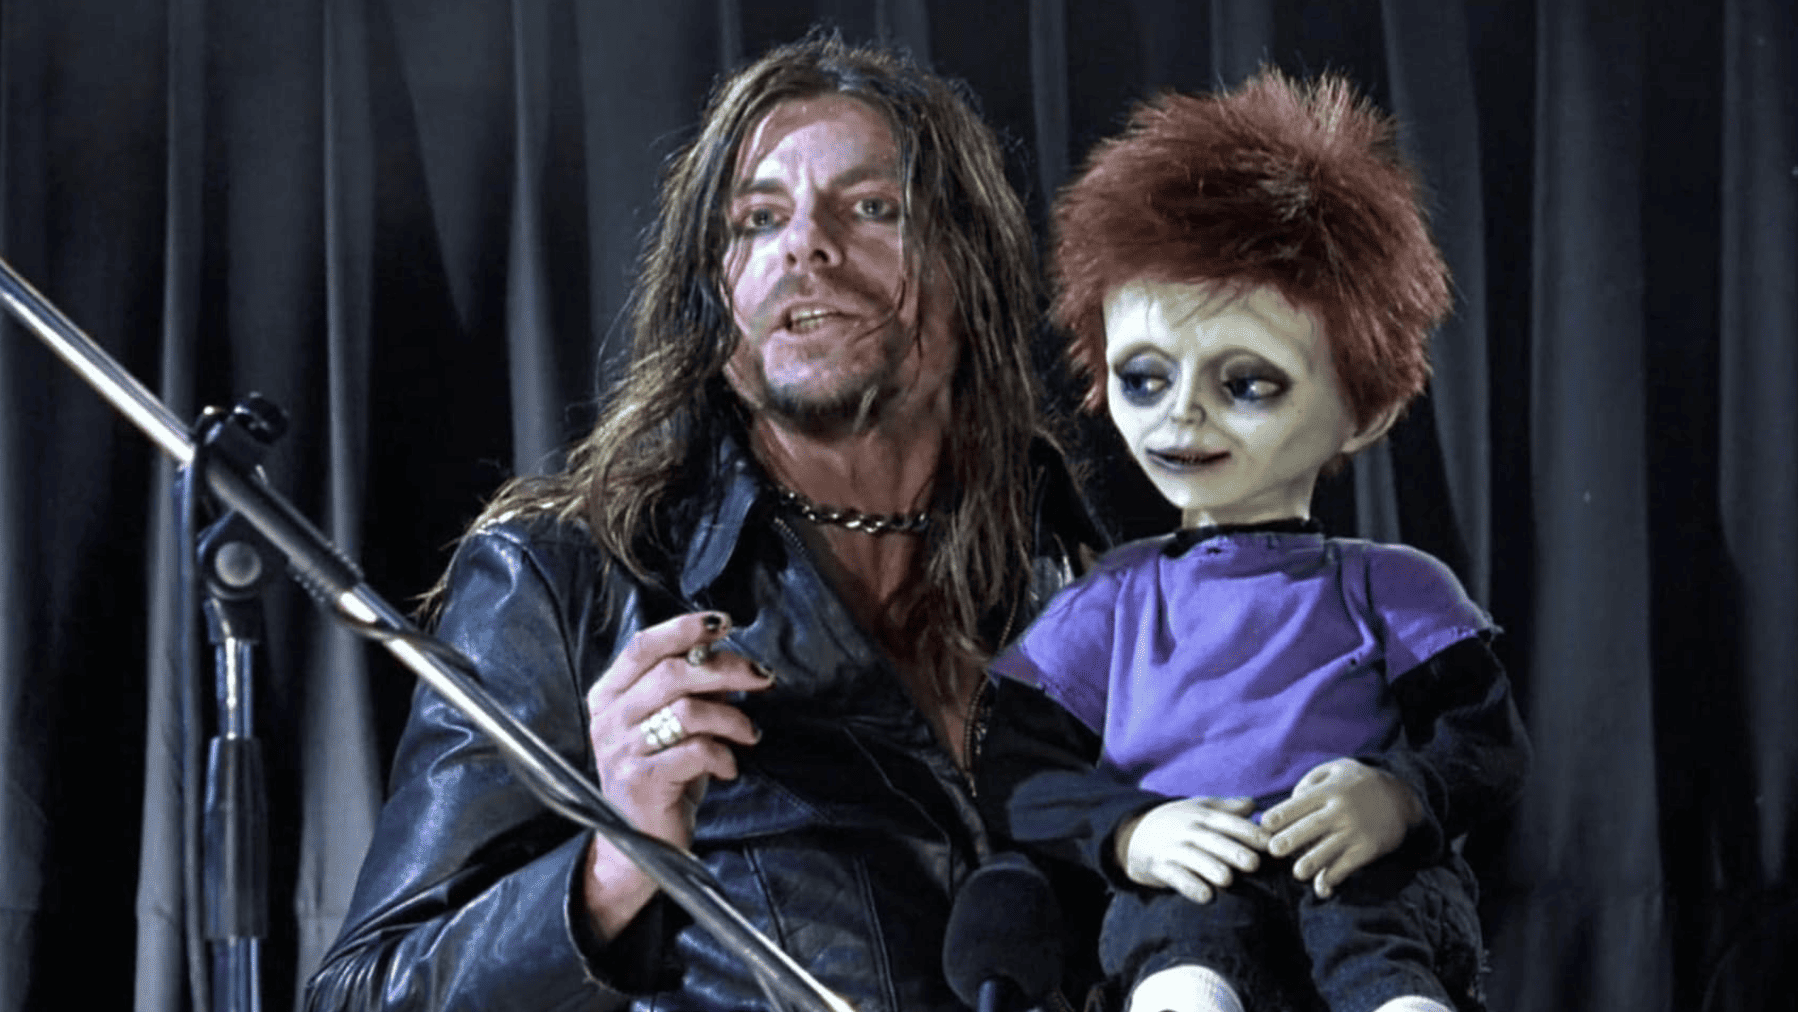 Keith-Lee Castle as “Psychs” holding a green, wide-eyed doll in this image from Rogue Pictures.